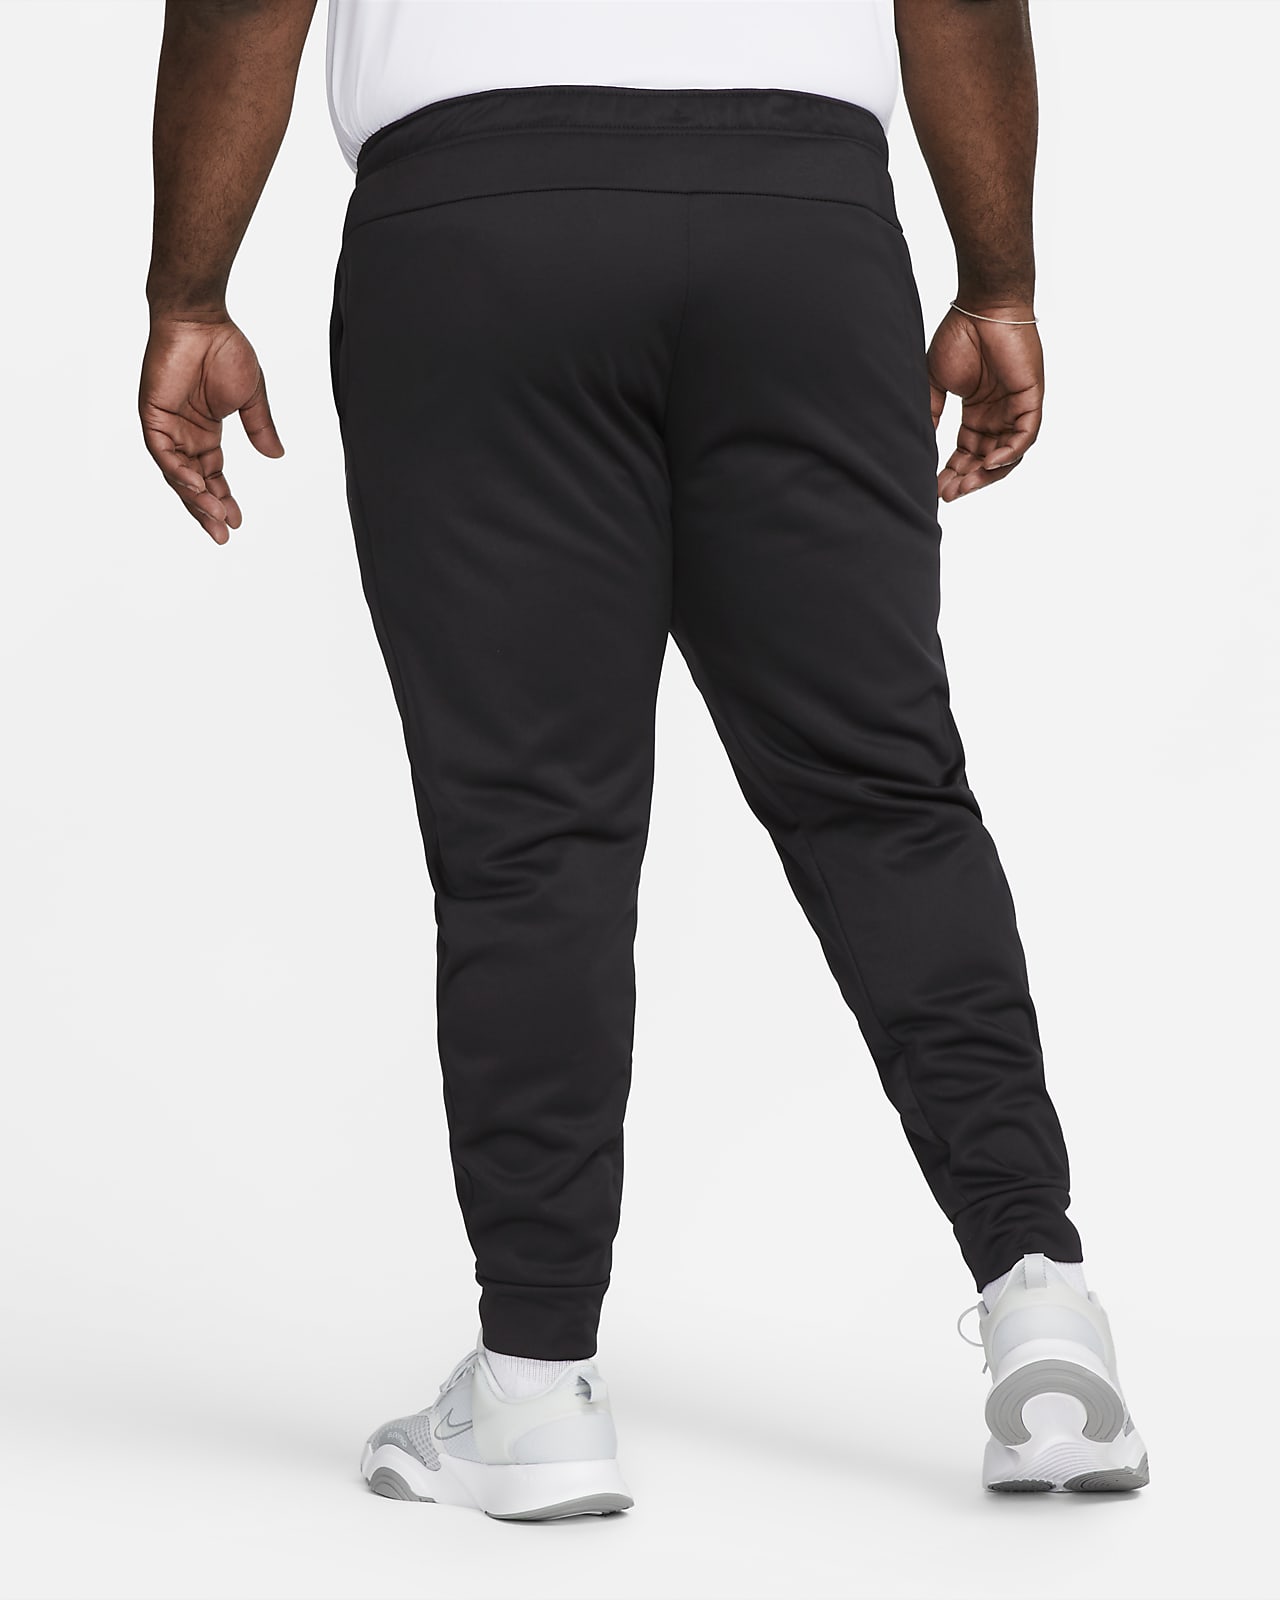 Women's Activewear Woven Track Pants - All In Motion Black XL